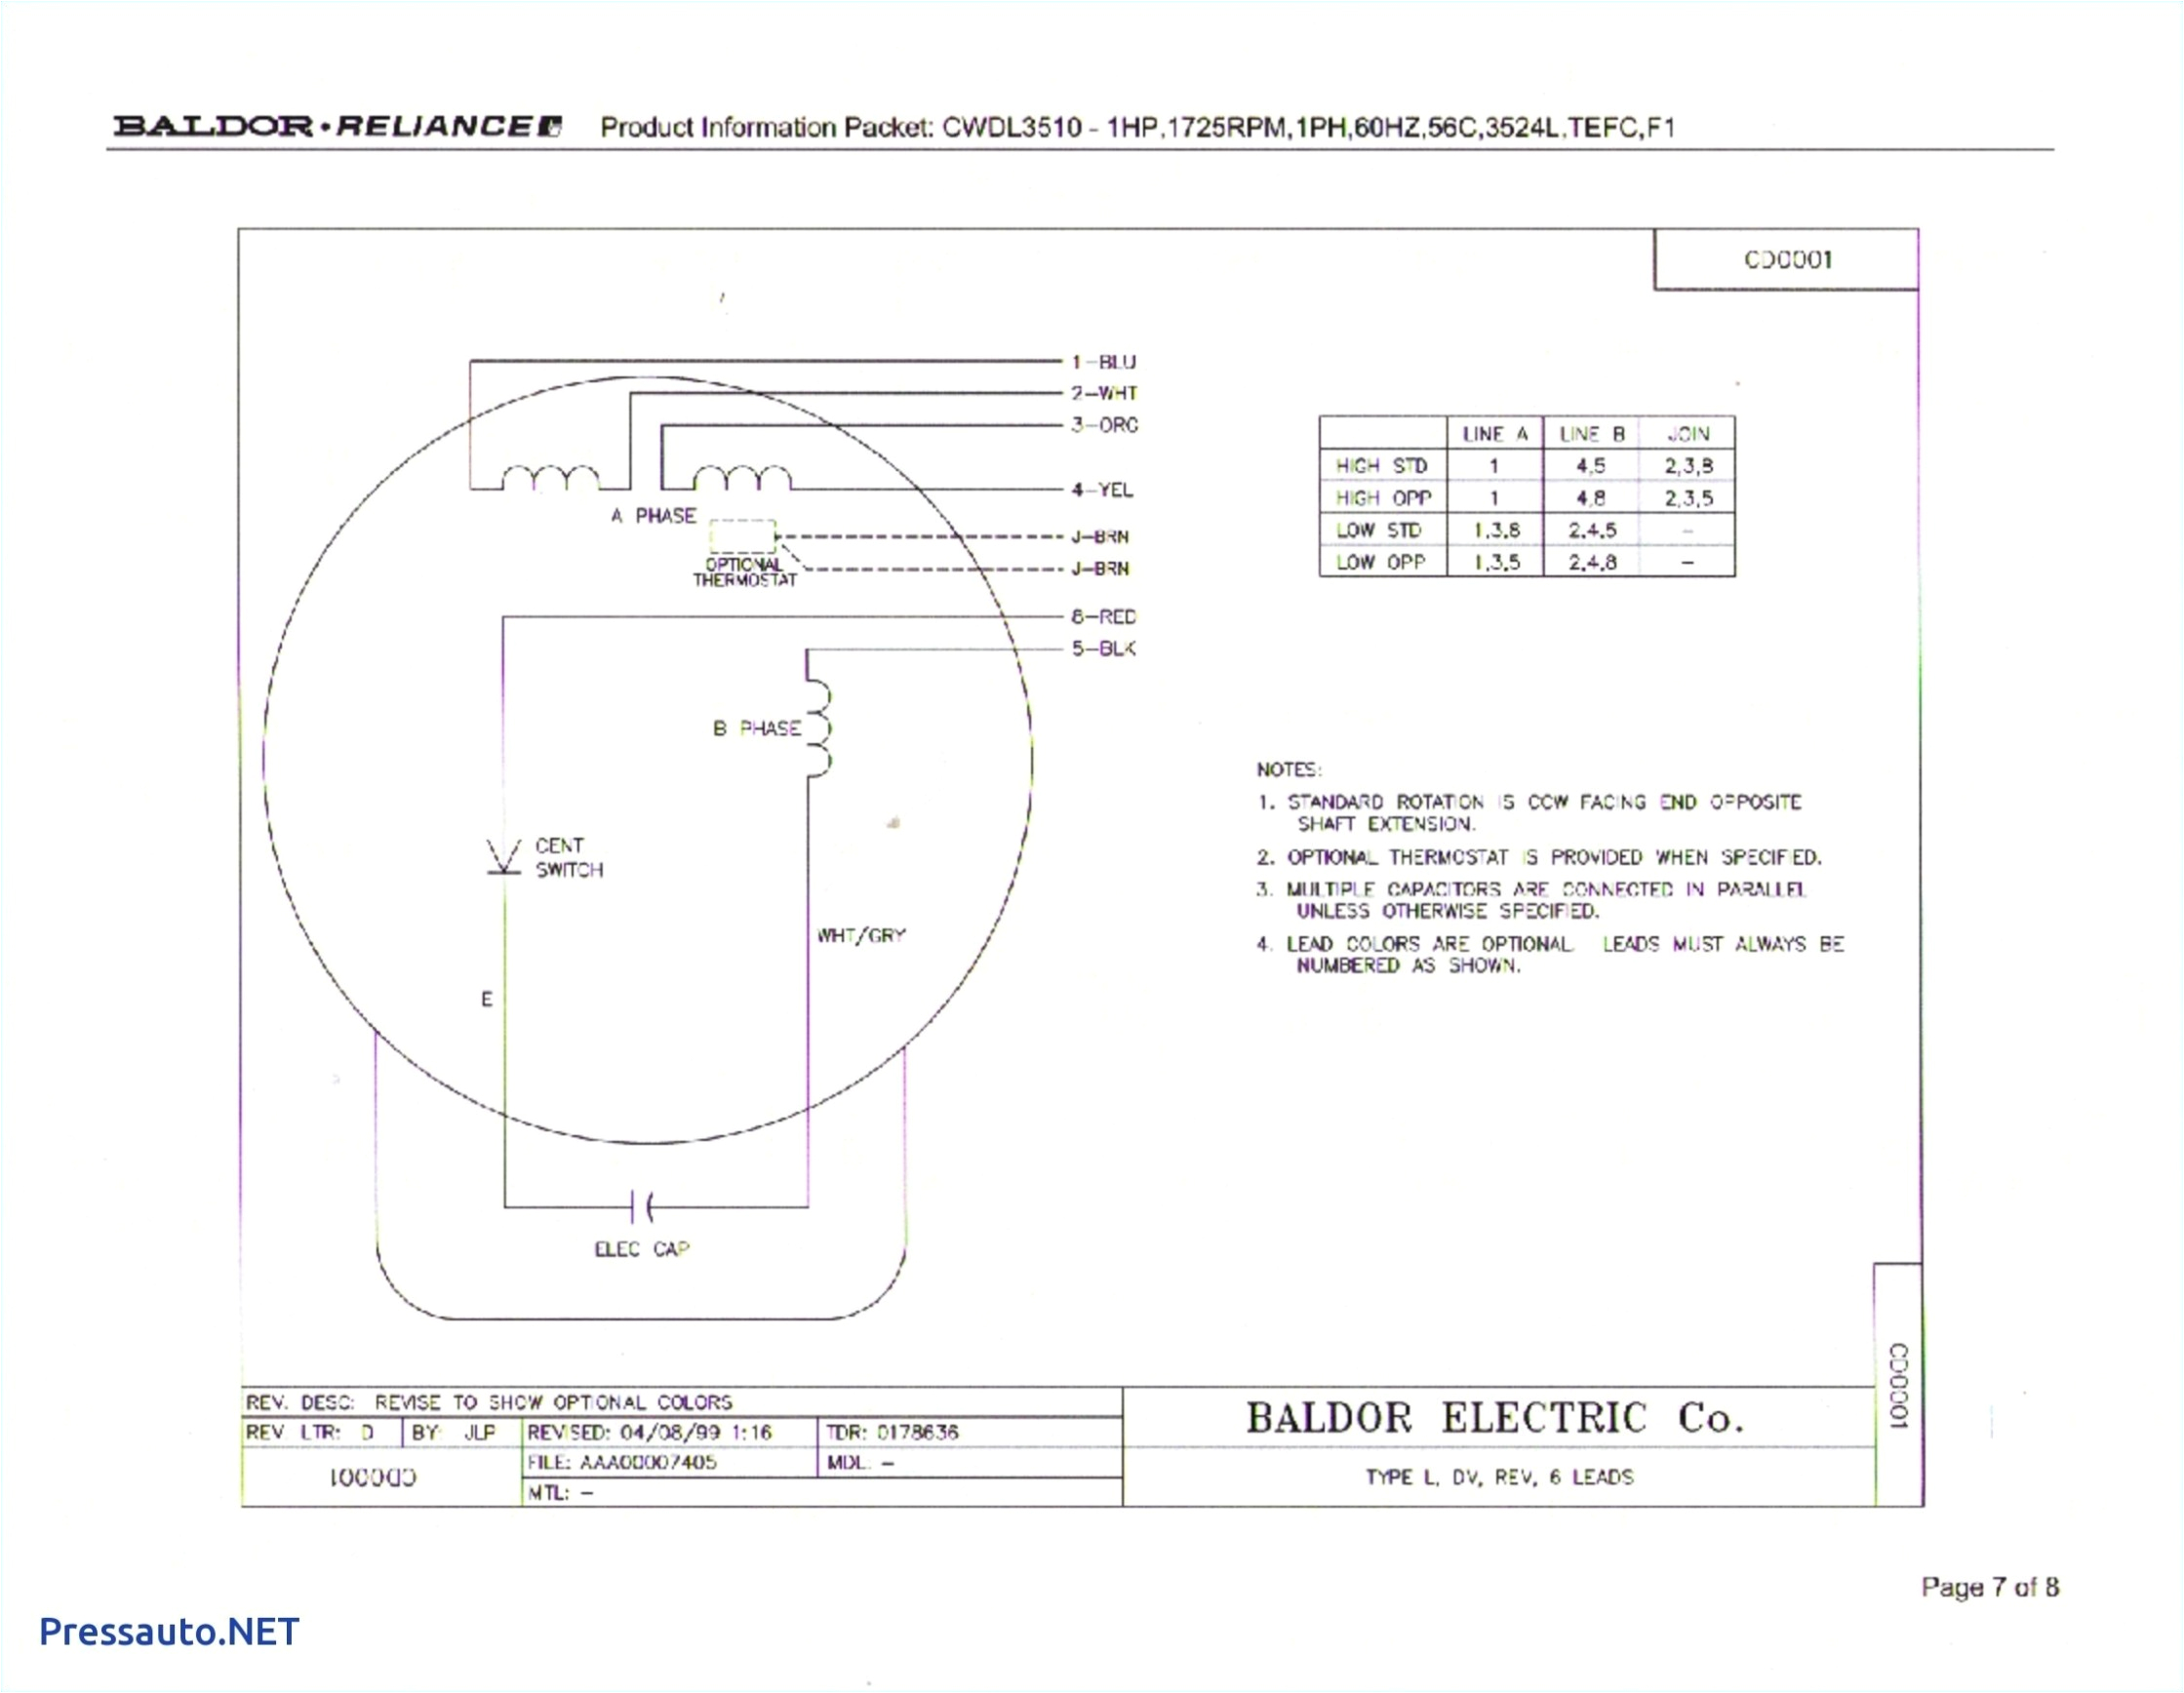 addition electric motor schematic diagram also baldor electric motor baldor motor wiring diagrams single phase baldor